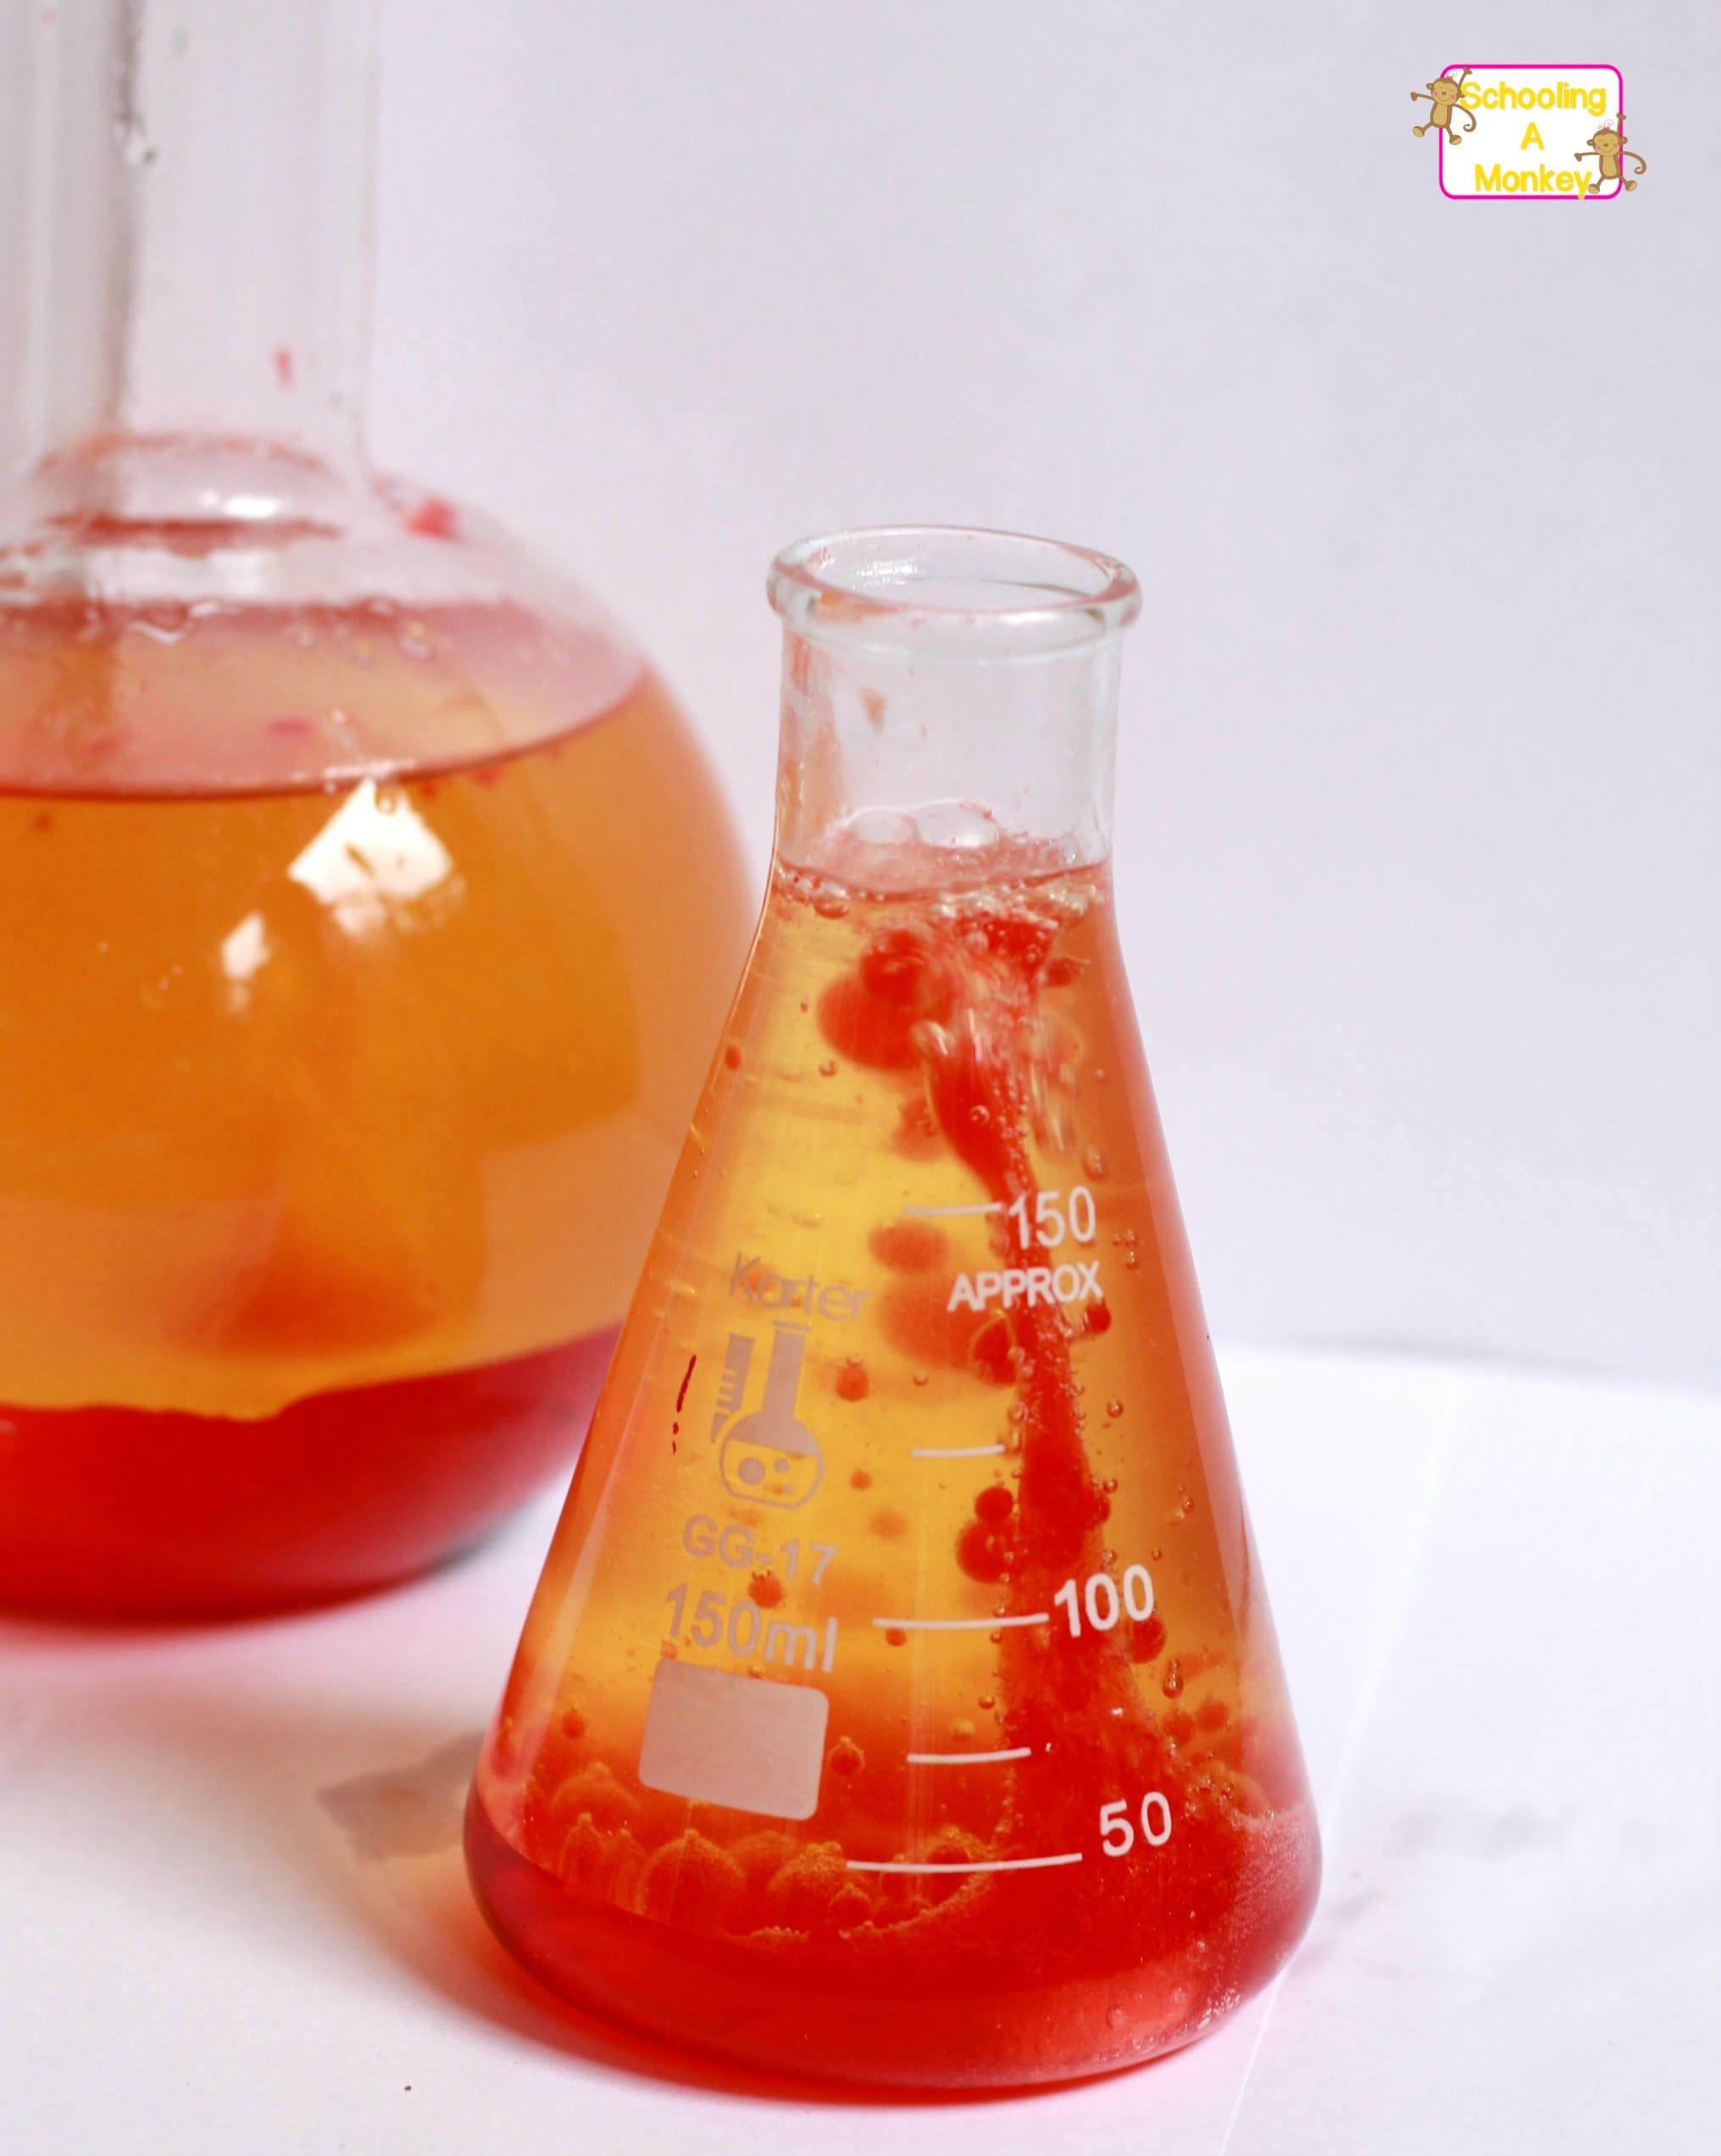 Halloween science projects are the perfect way to introduce science to kids. This spider leg potion is a creepy twist on a classic science experiment.